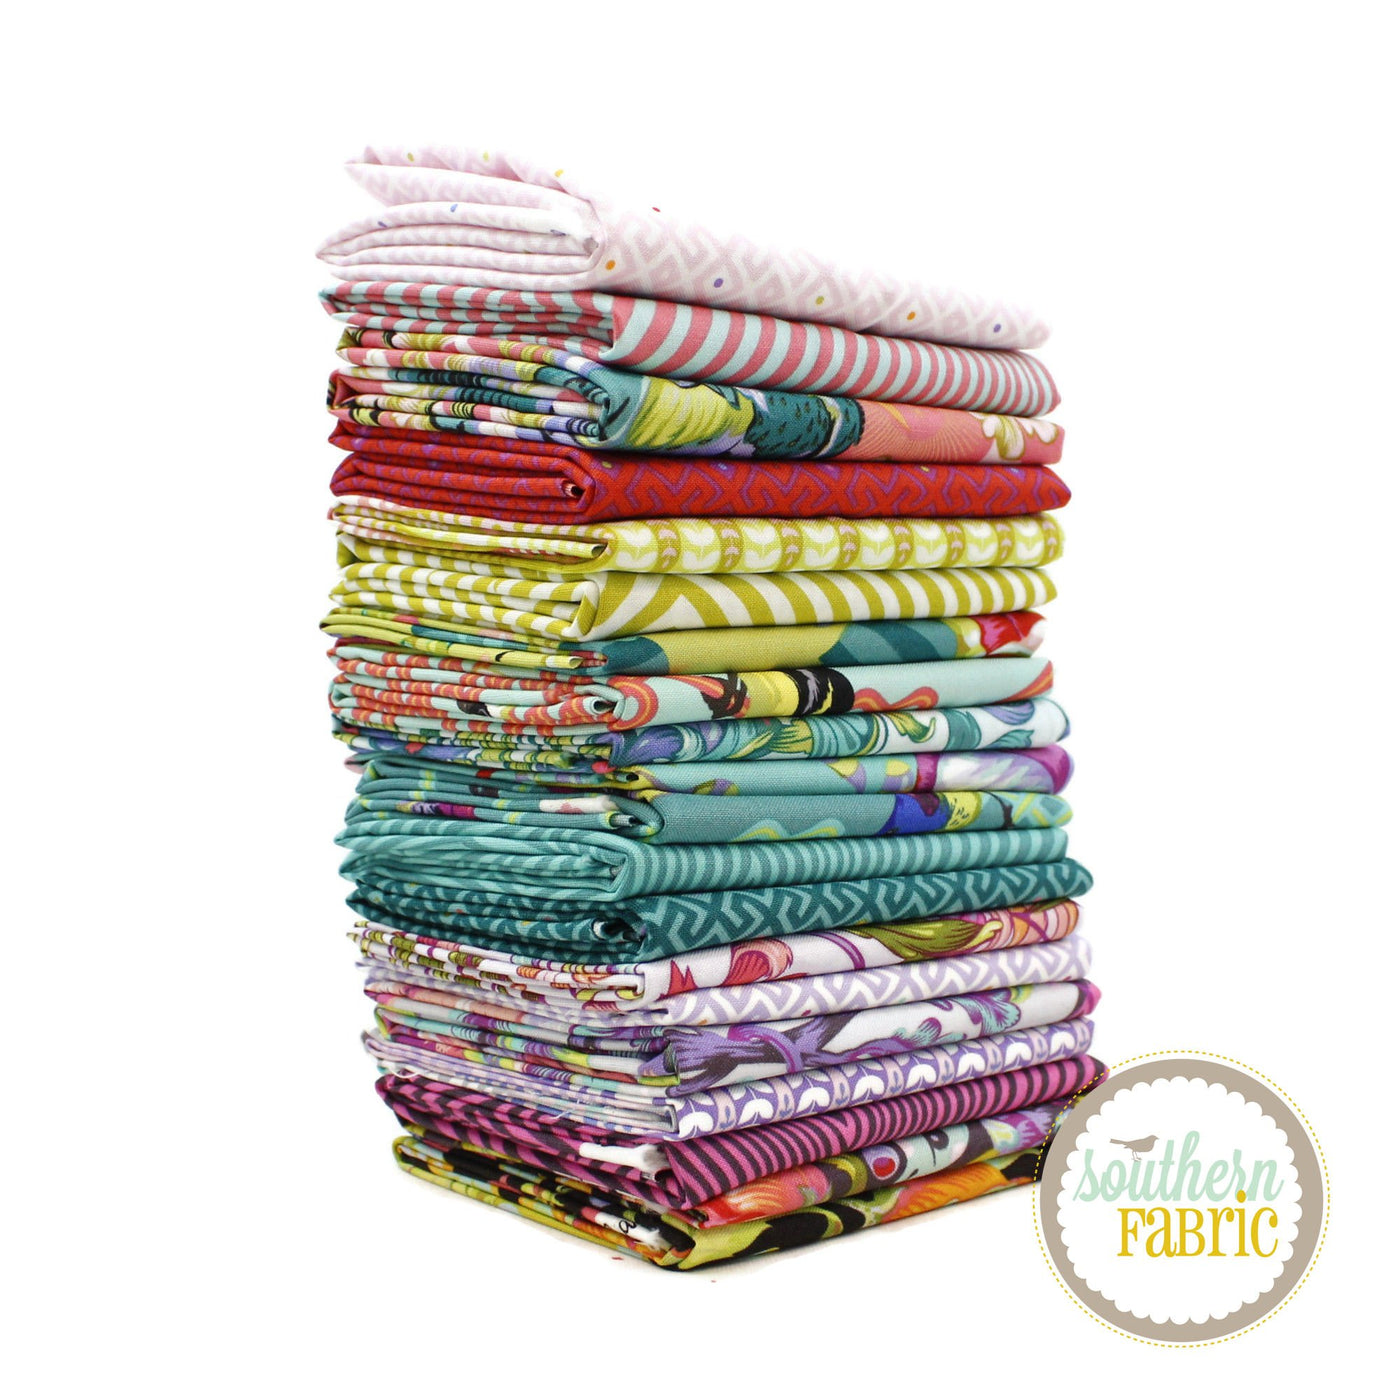 Moon Garden Fat Eighth Bundle (20 pcs) by Tula Pink for Free Spirit (TP.MG.F8)